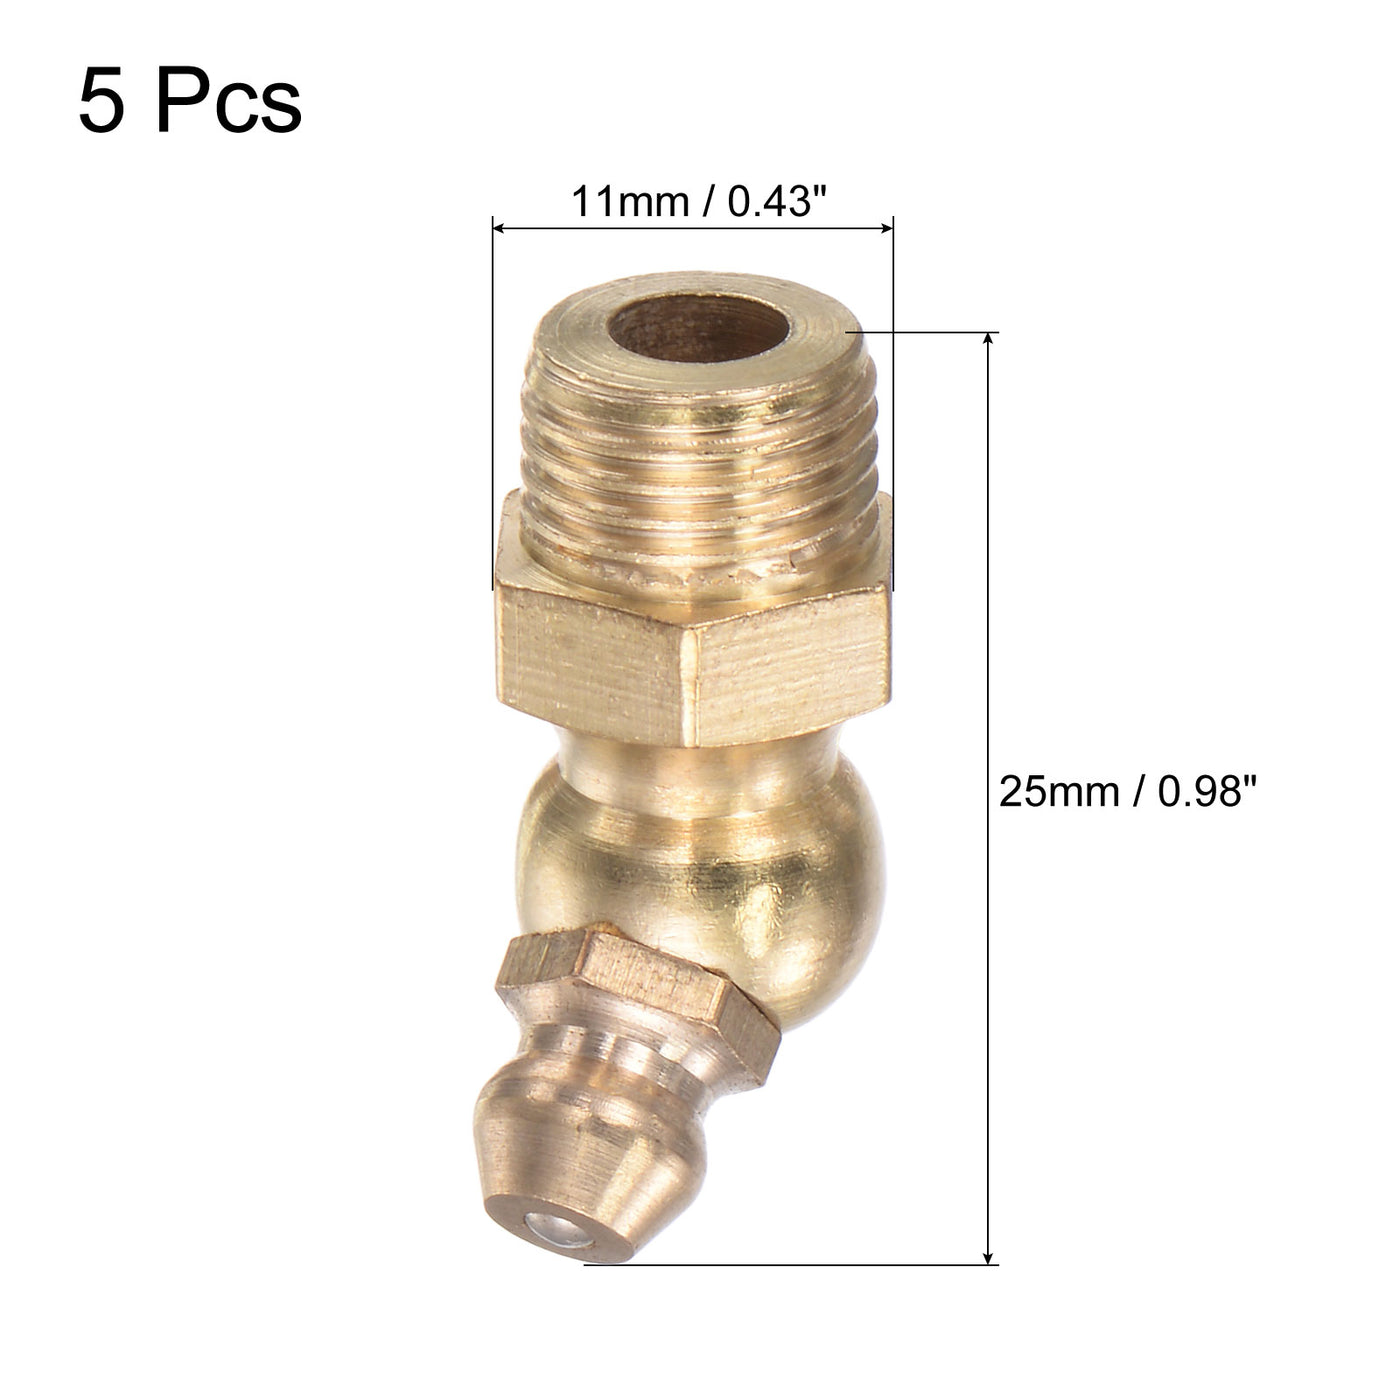 Uxcell Uxcell Brass 45 Degree Hydraulic Grease Fitting M12 x 1mm Thread, 5Pcs